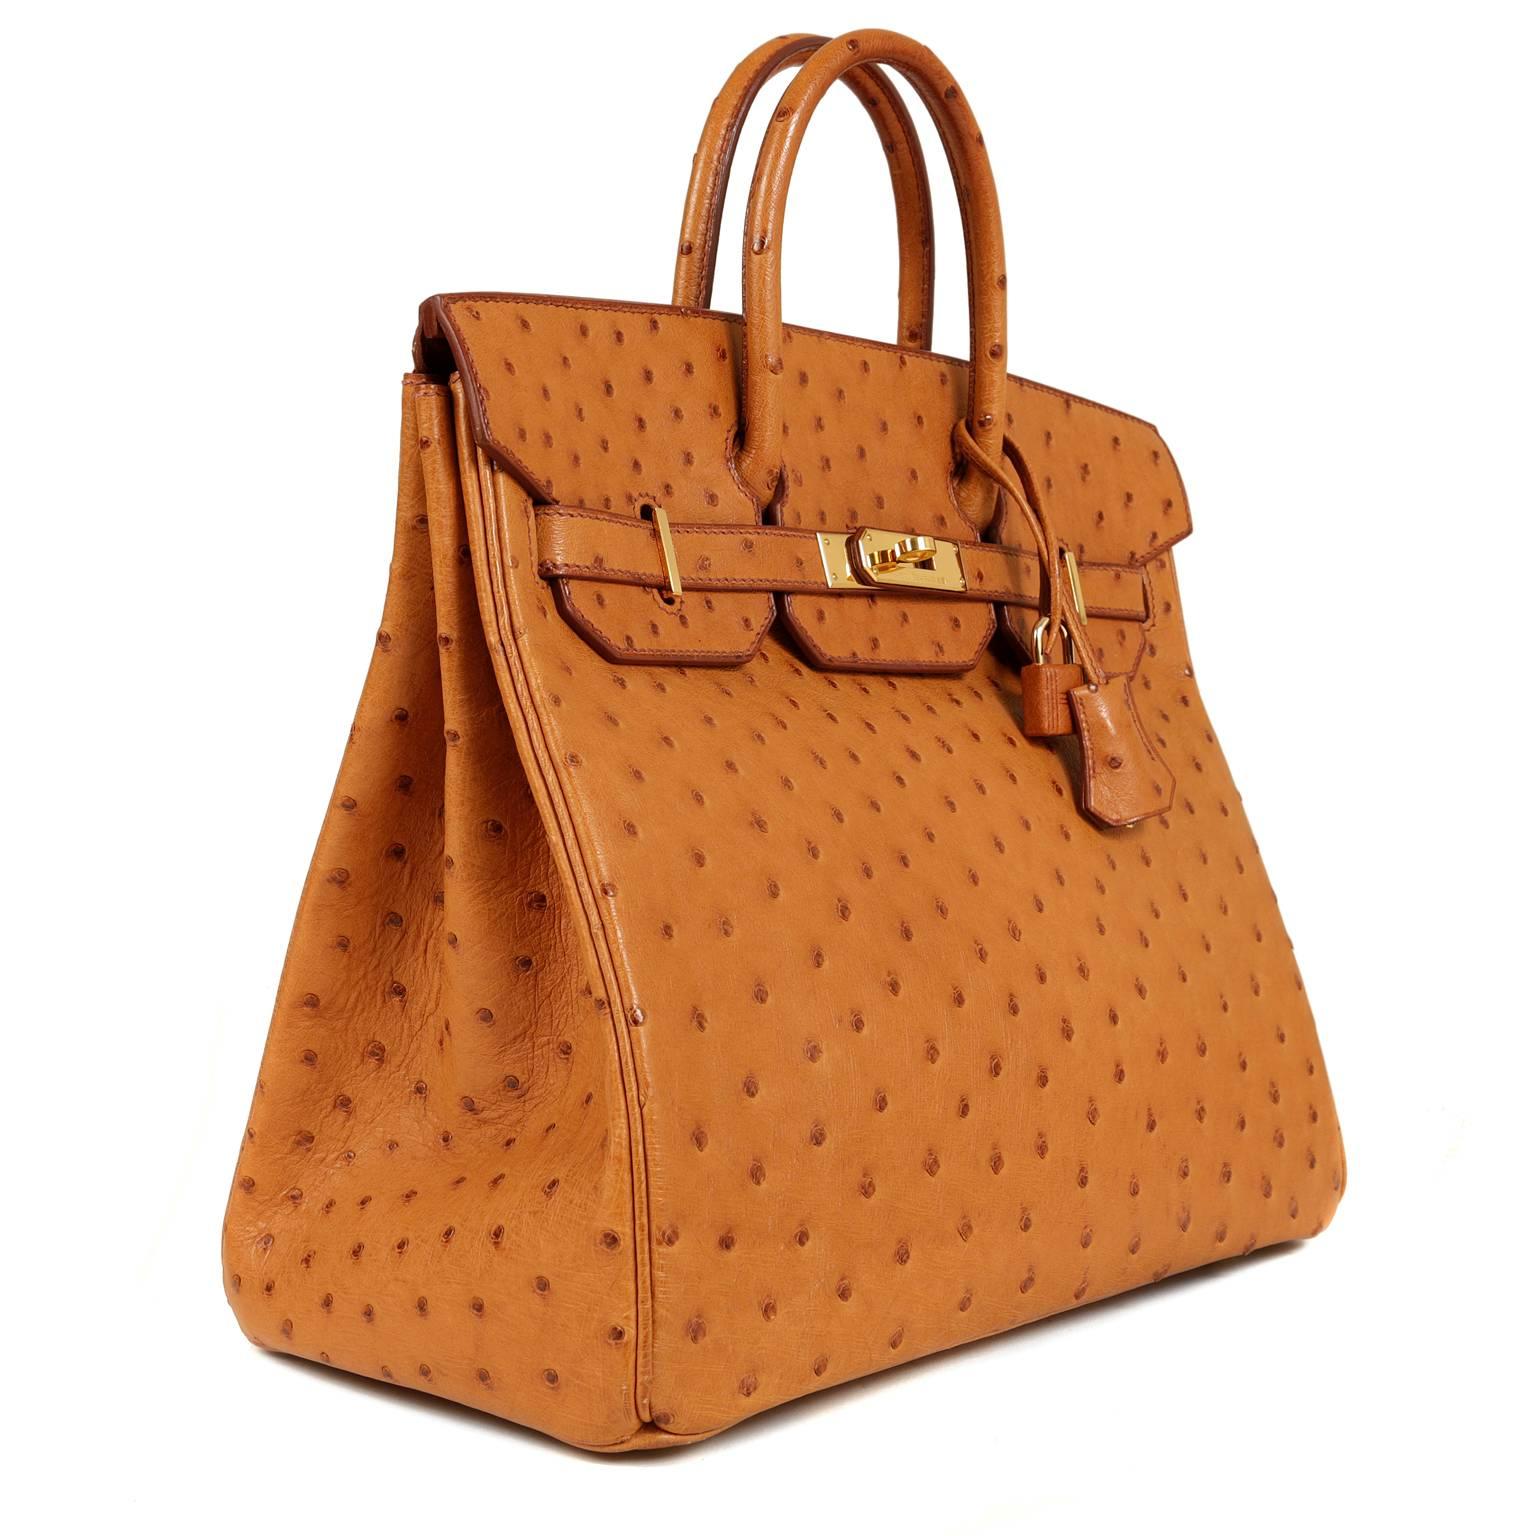 Hermès Saffron Ostrich 32 cm HAC- Nearly Pristine

Considered the ultimate luxury item the world over and hand stitched by skilled craftsmen, wait lists of a year or more are commonplace for Hermès bags. This particular piece is in Saffron